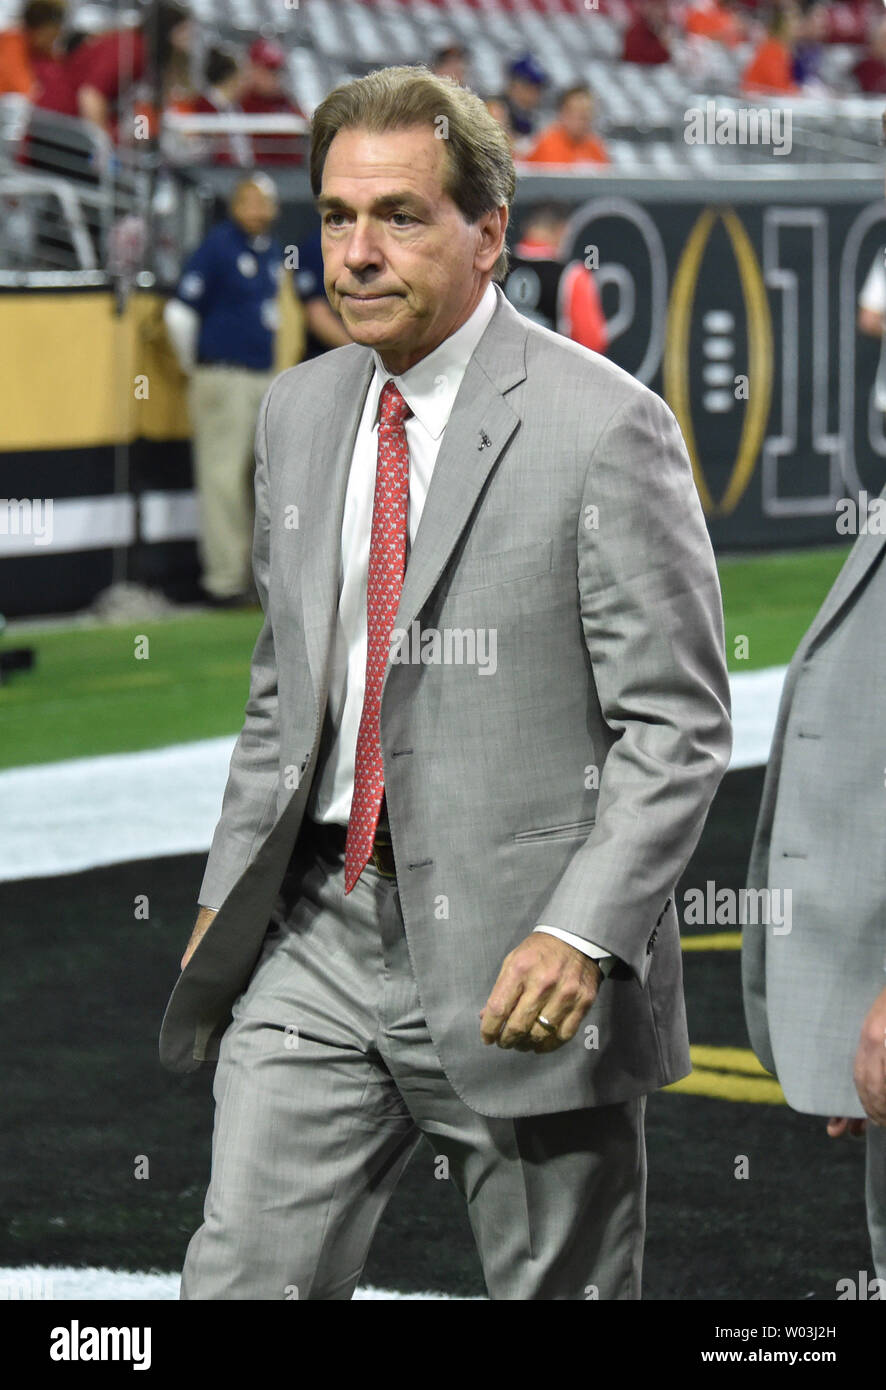 Alabama Crimson Tide head coach Nick Saban walks off the field to locker room prior to game against the Clemson Tigers for the 2016 College Football Playoff National Championship at University of Phoenix Stadium in Glendale, Arizona on January 11, 2016. Photo by Jon SooHoo/UPI Stock Photo